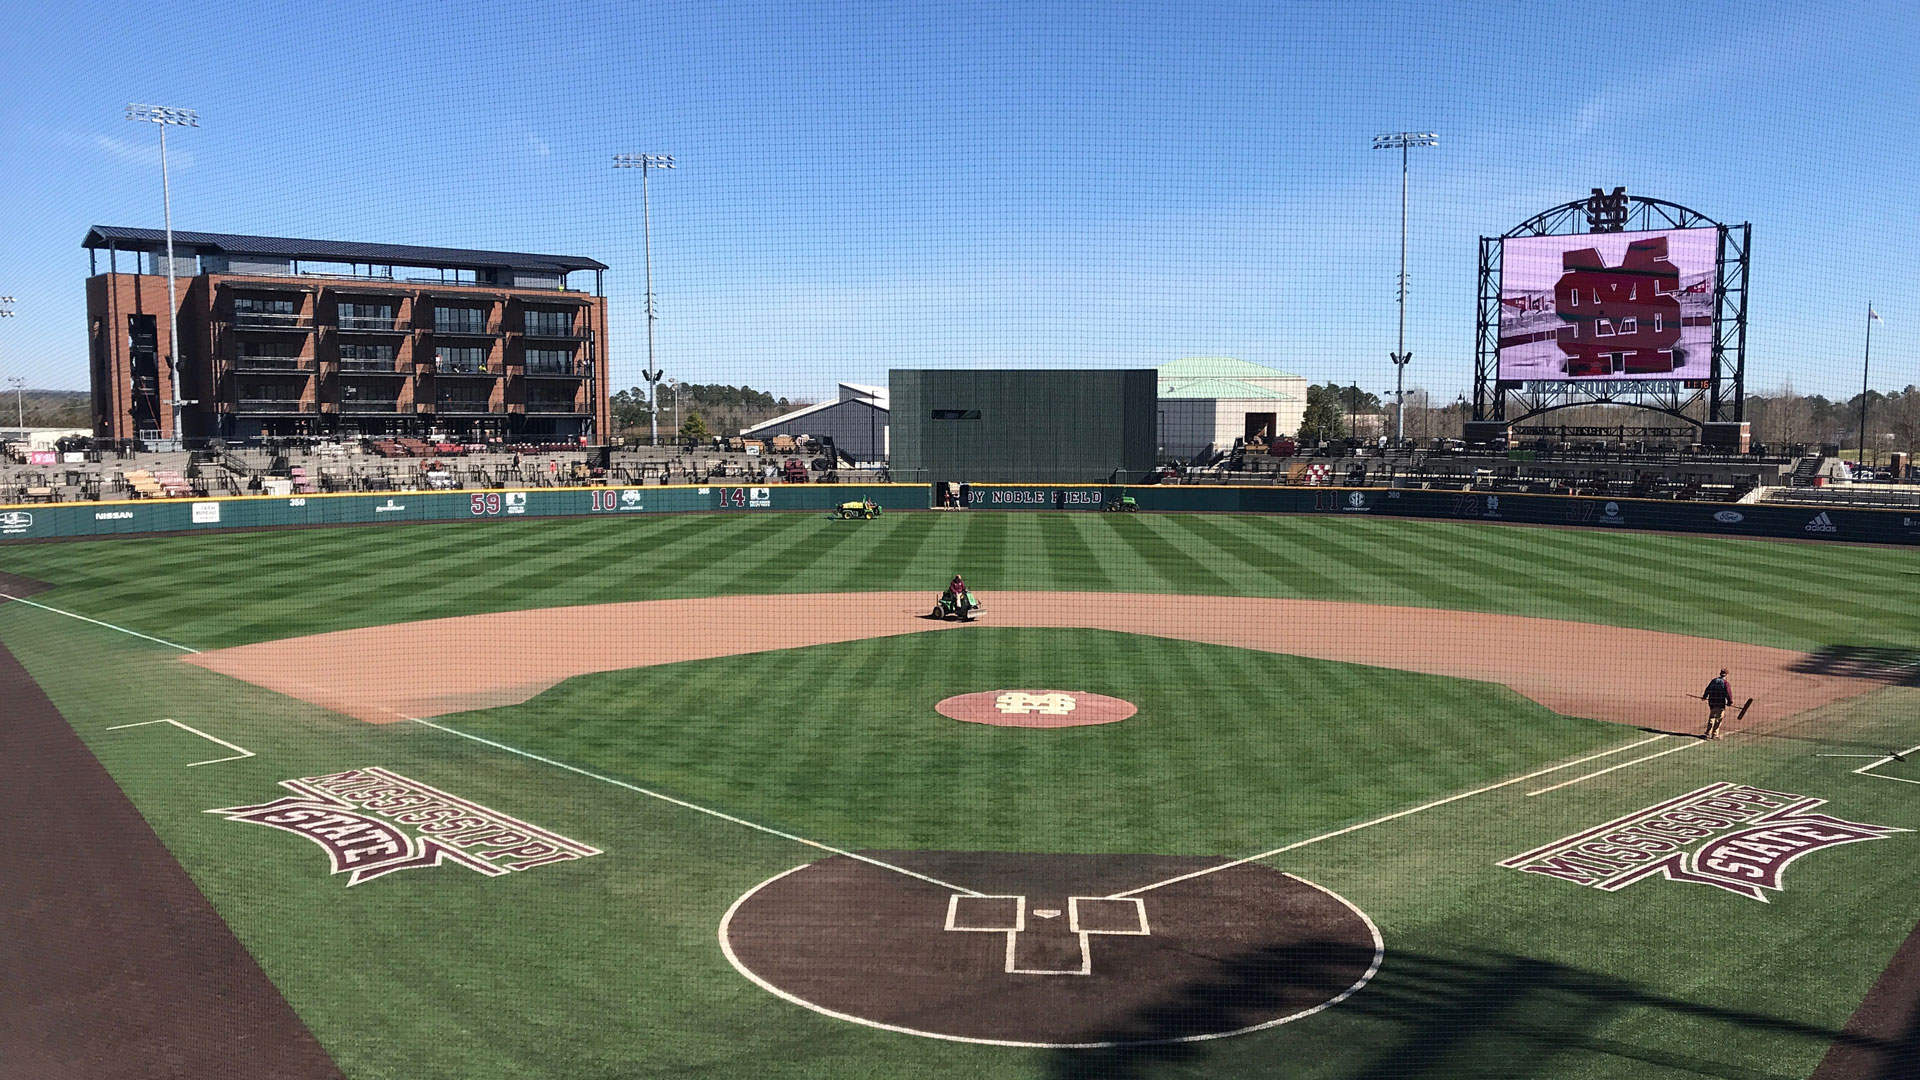 MSU's Dudy Noble Field, home to NCAA's National Baseball Champions